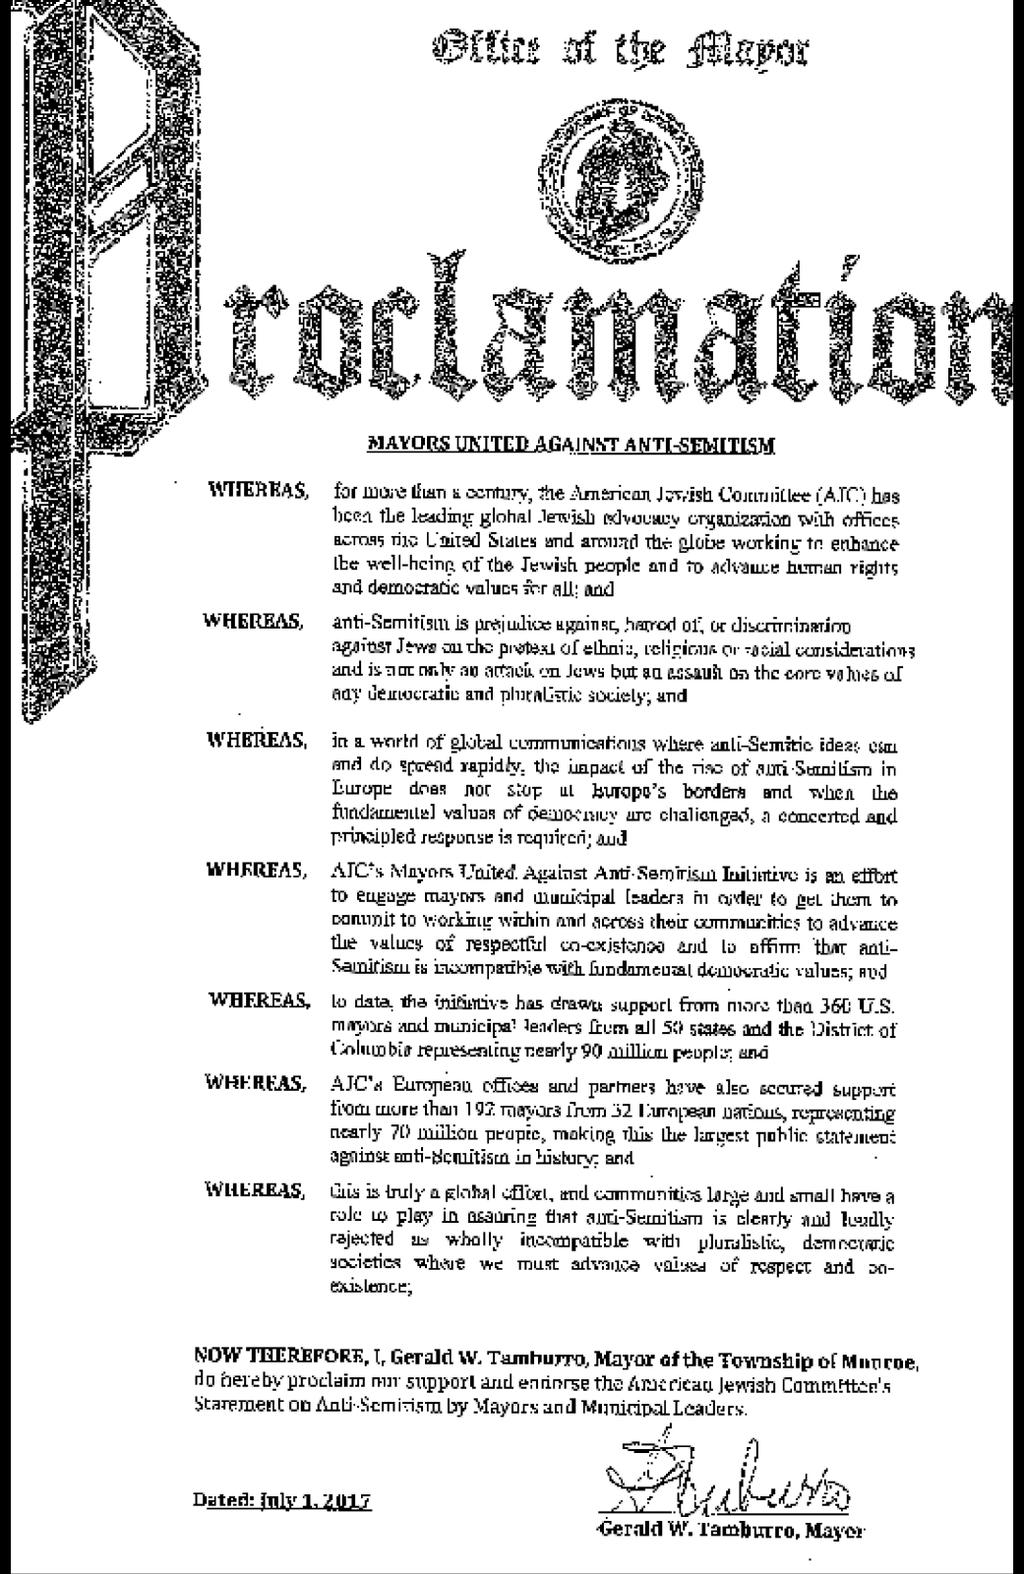 Tamburro issued a proclamation on behalf of Monroe Township, "repudiating"